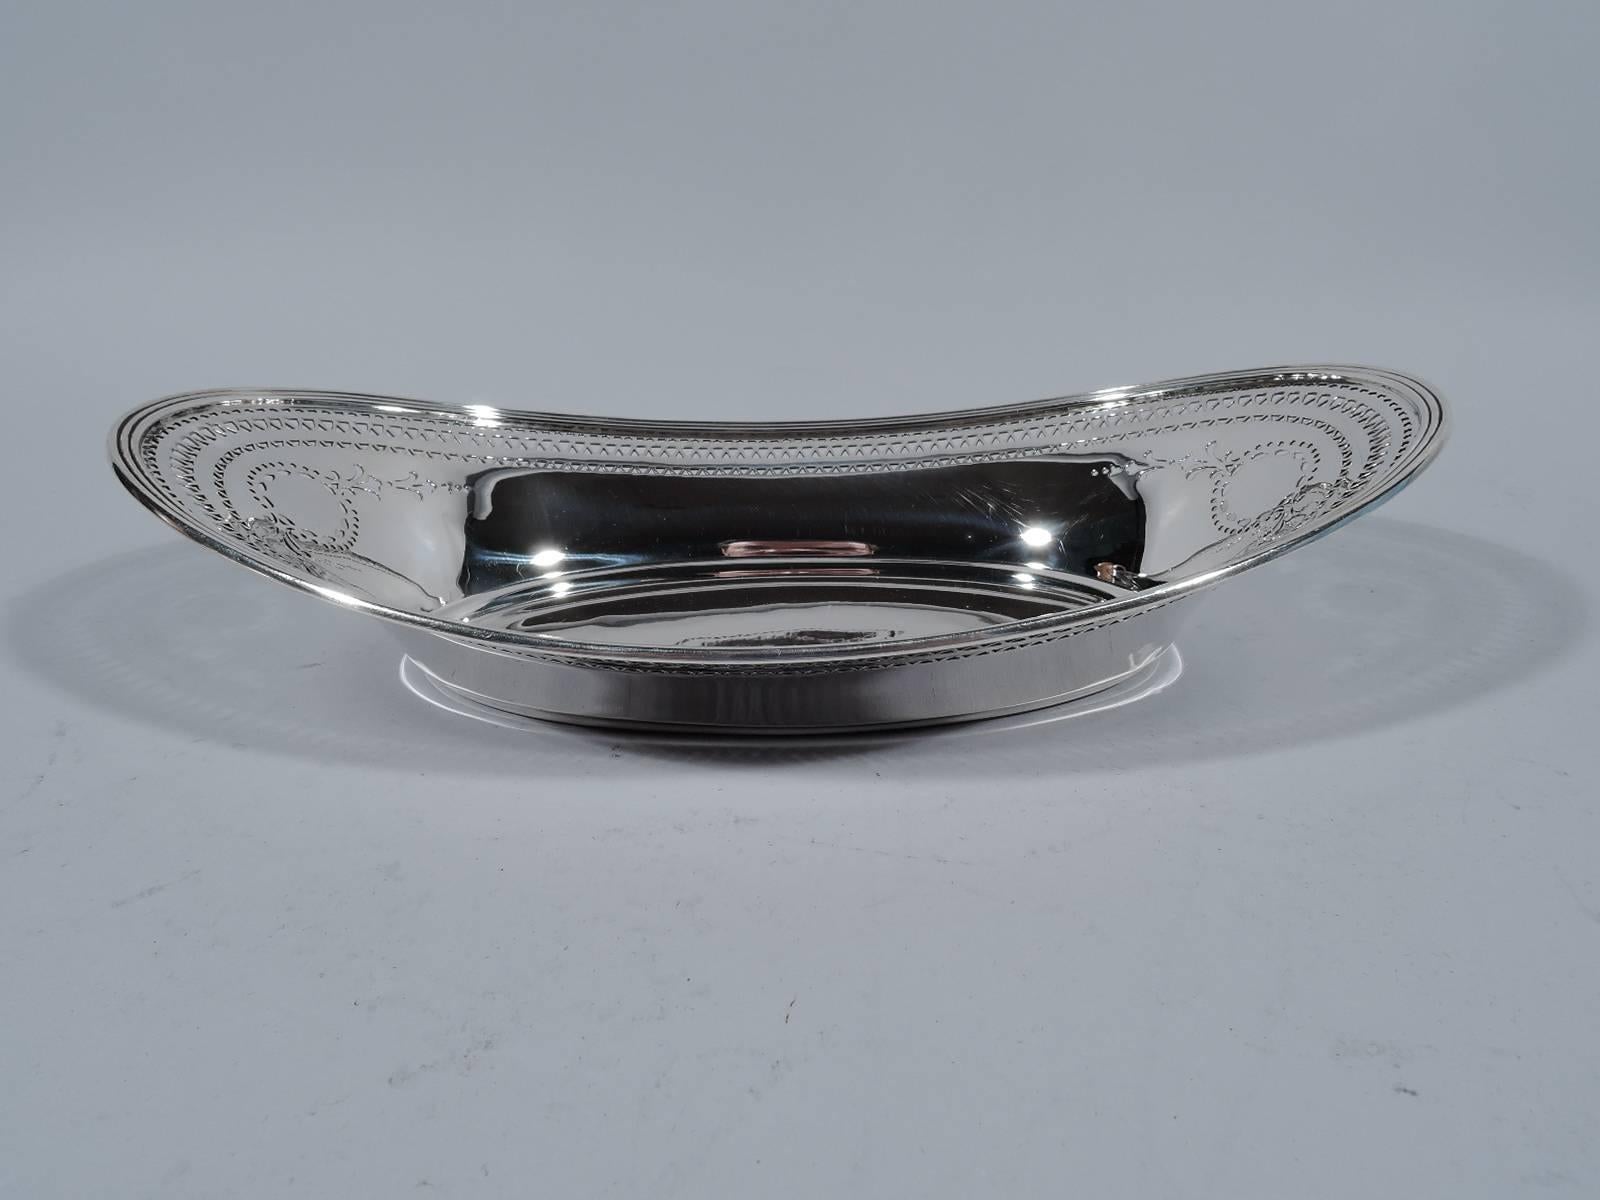 Edwardian sterling silver bread tray. Made by Tiffany & Co. in New York, circa 1912. Oval well with tapering sides and reeded and asymmetrical rim. Pierced borders and garland-supported wreaths (vacant). Hallmark includes pattern no. 18197B (first